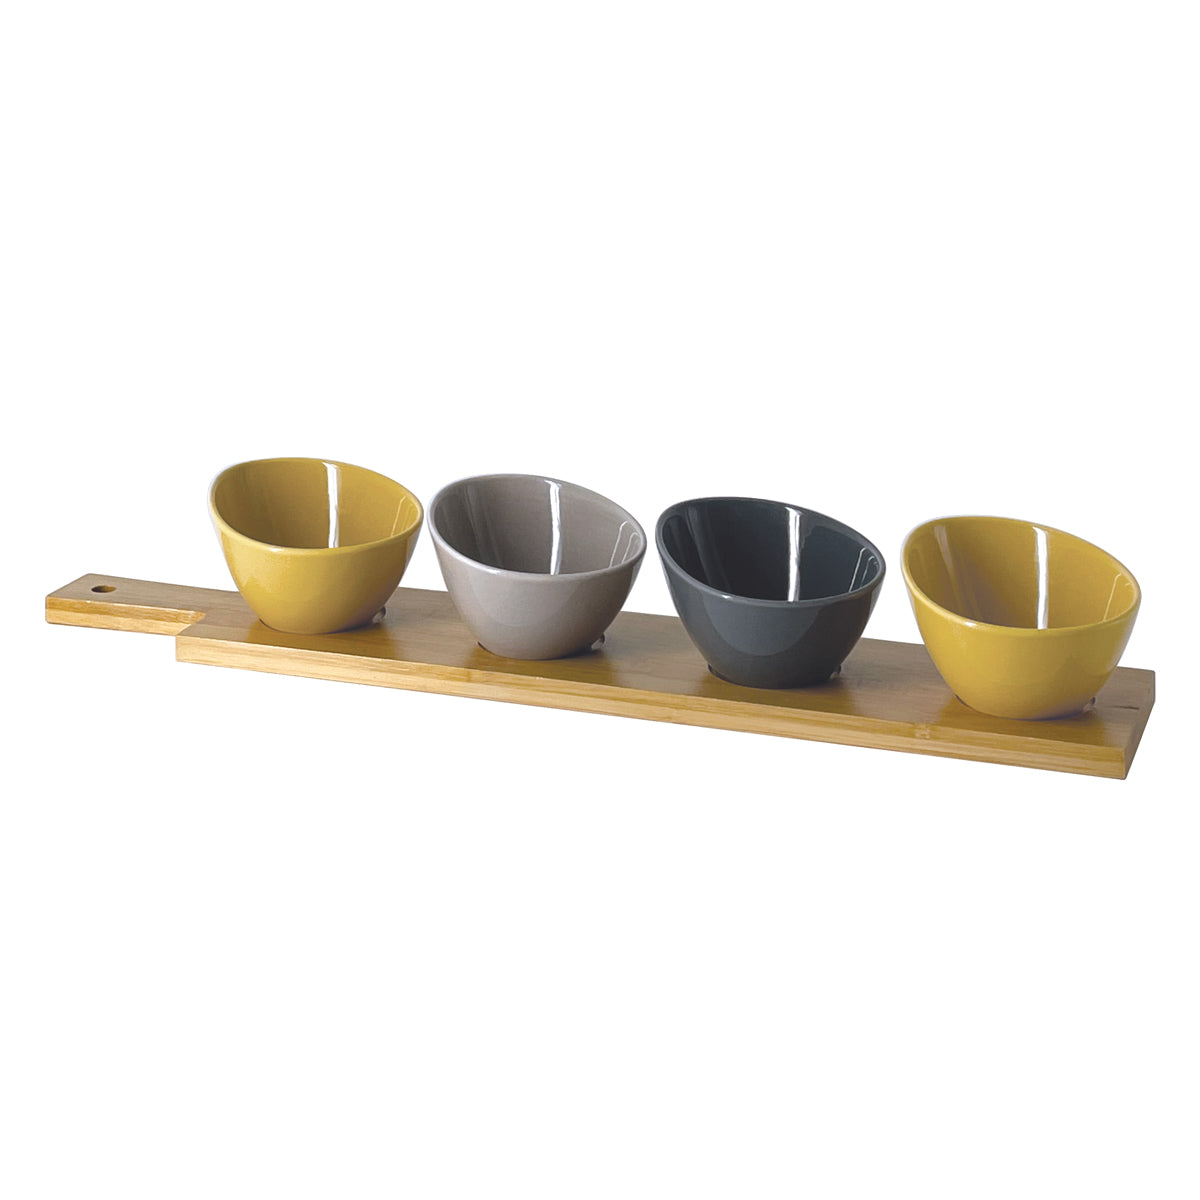 Appetizer set 29x13 w/4 porcelain round bowls on bamboo tray in color box  MANDALAY 